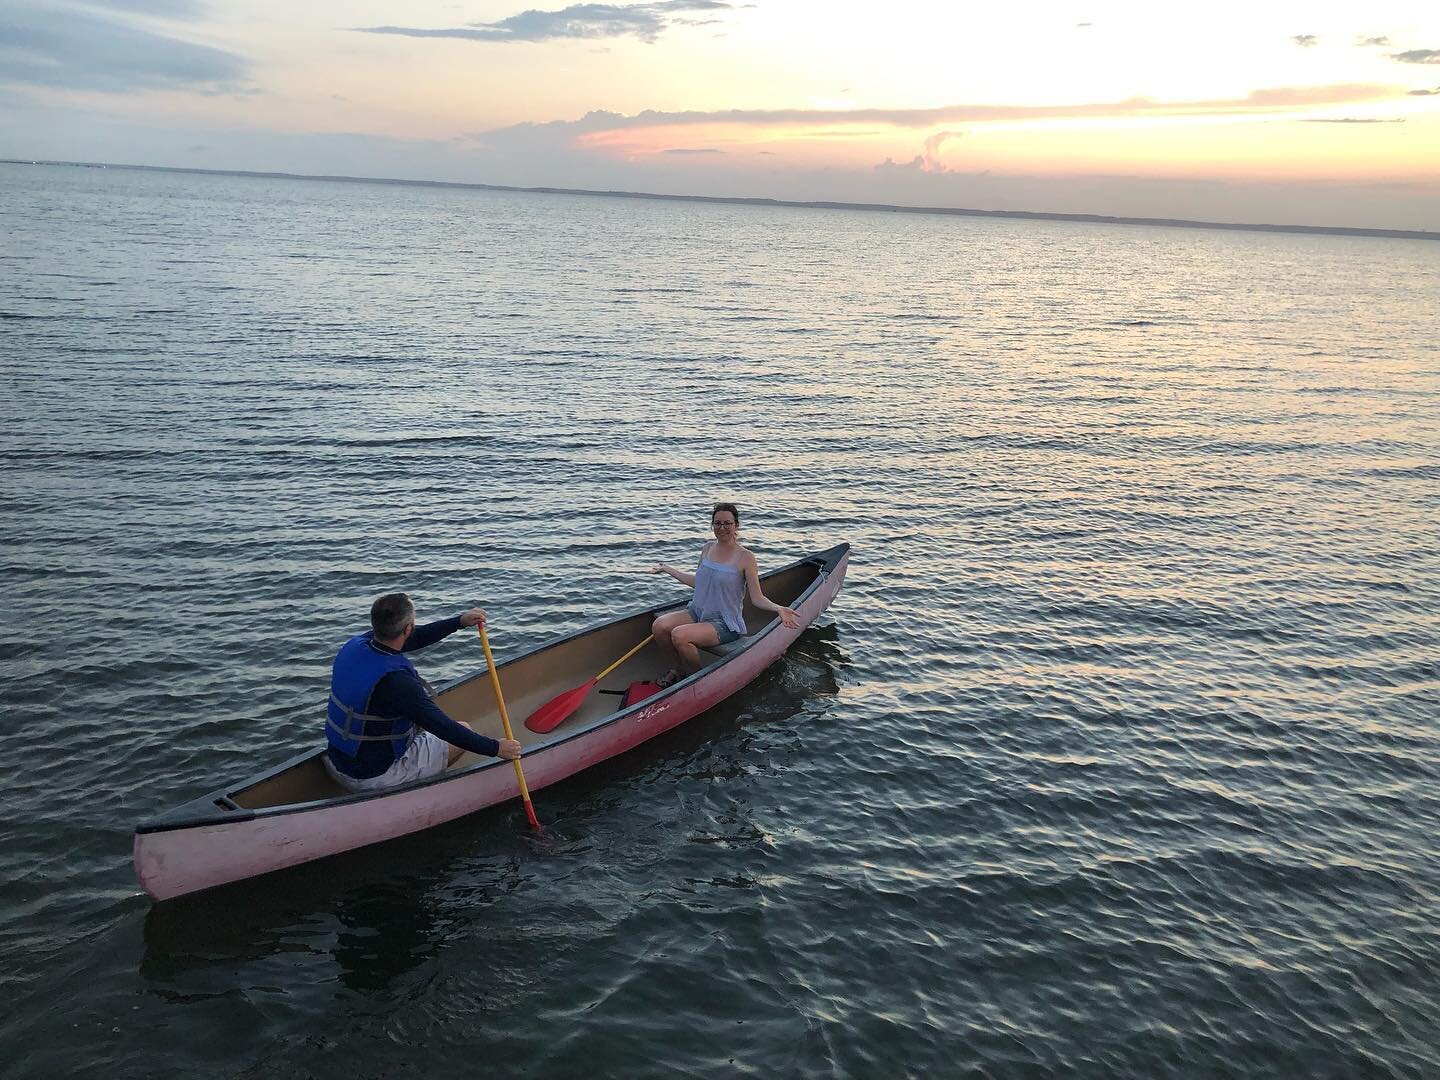 Sunset paddle, thanks for the canoe ride!